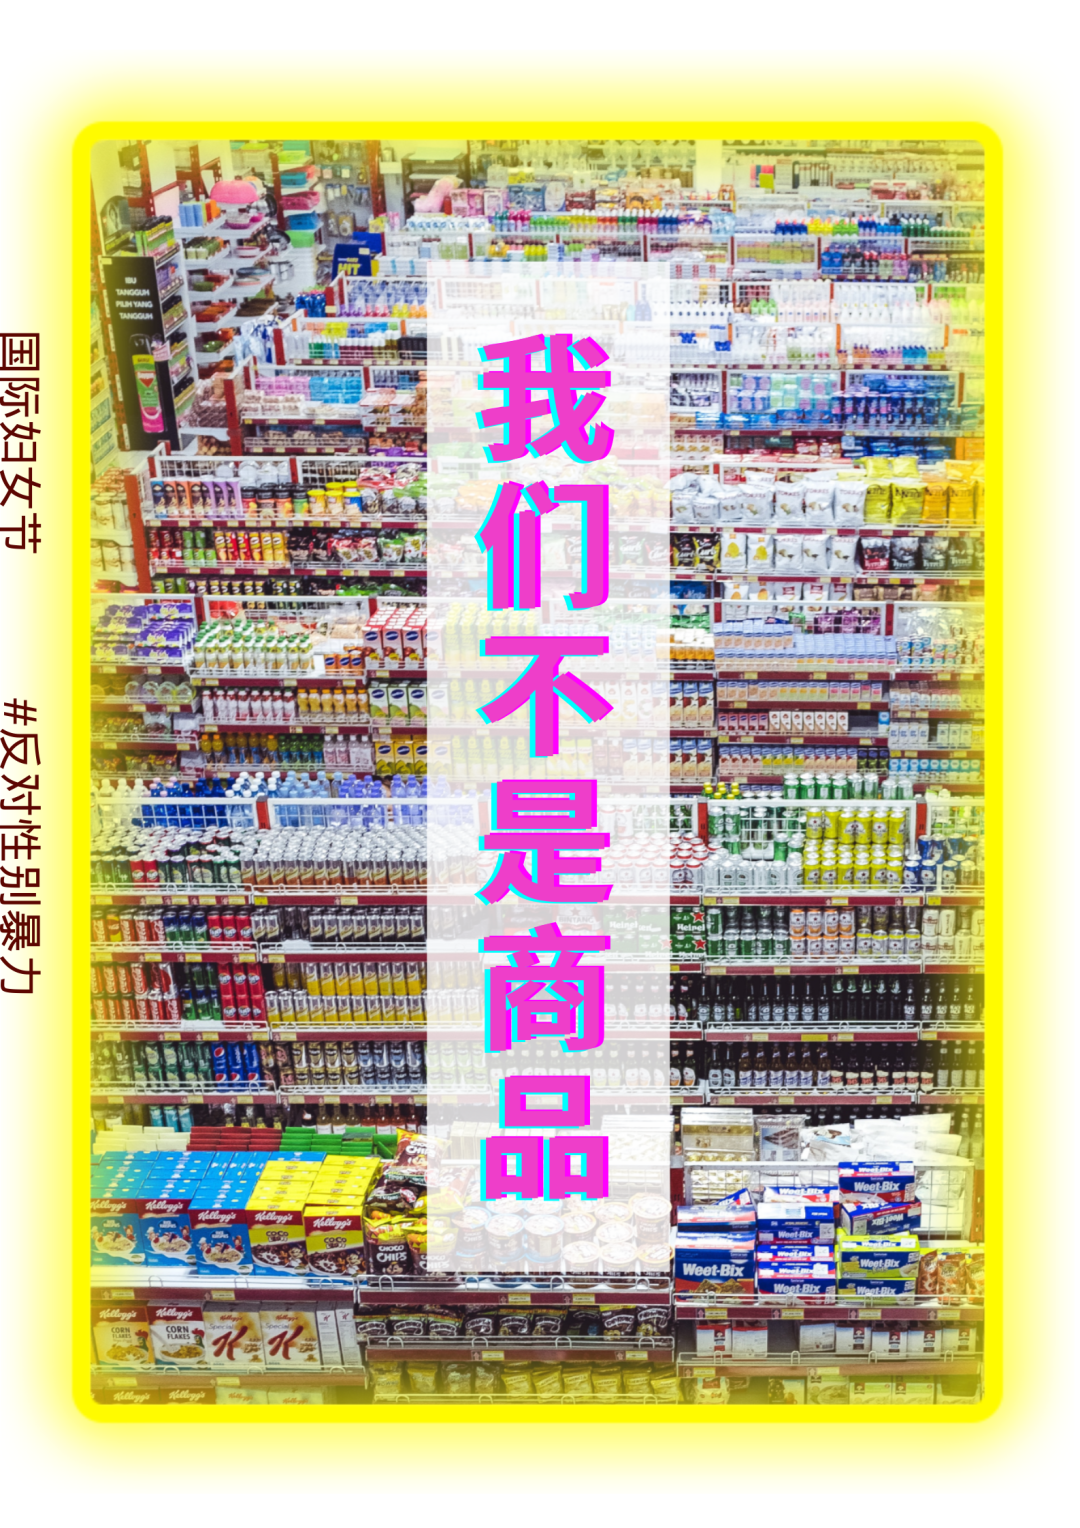 A photograph of perfectly-stocked grocery store shelves superimposed with the caption rendered in neon-pink with blue highlights.